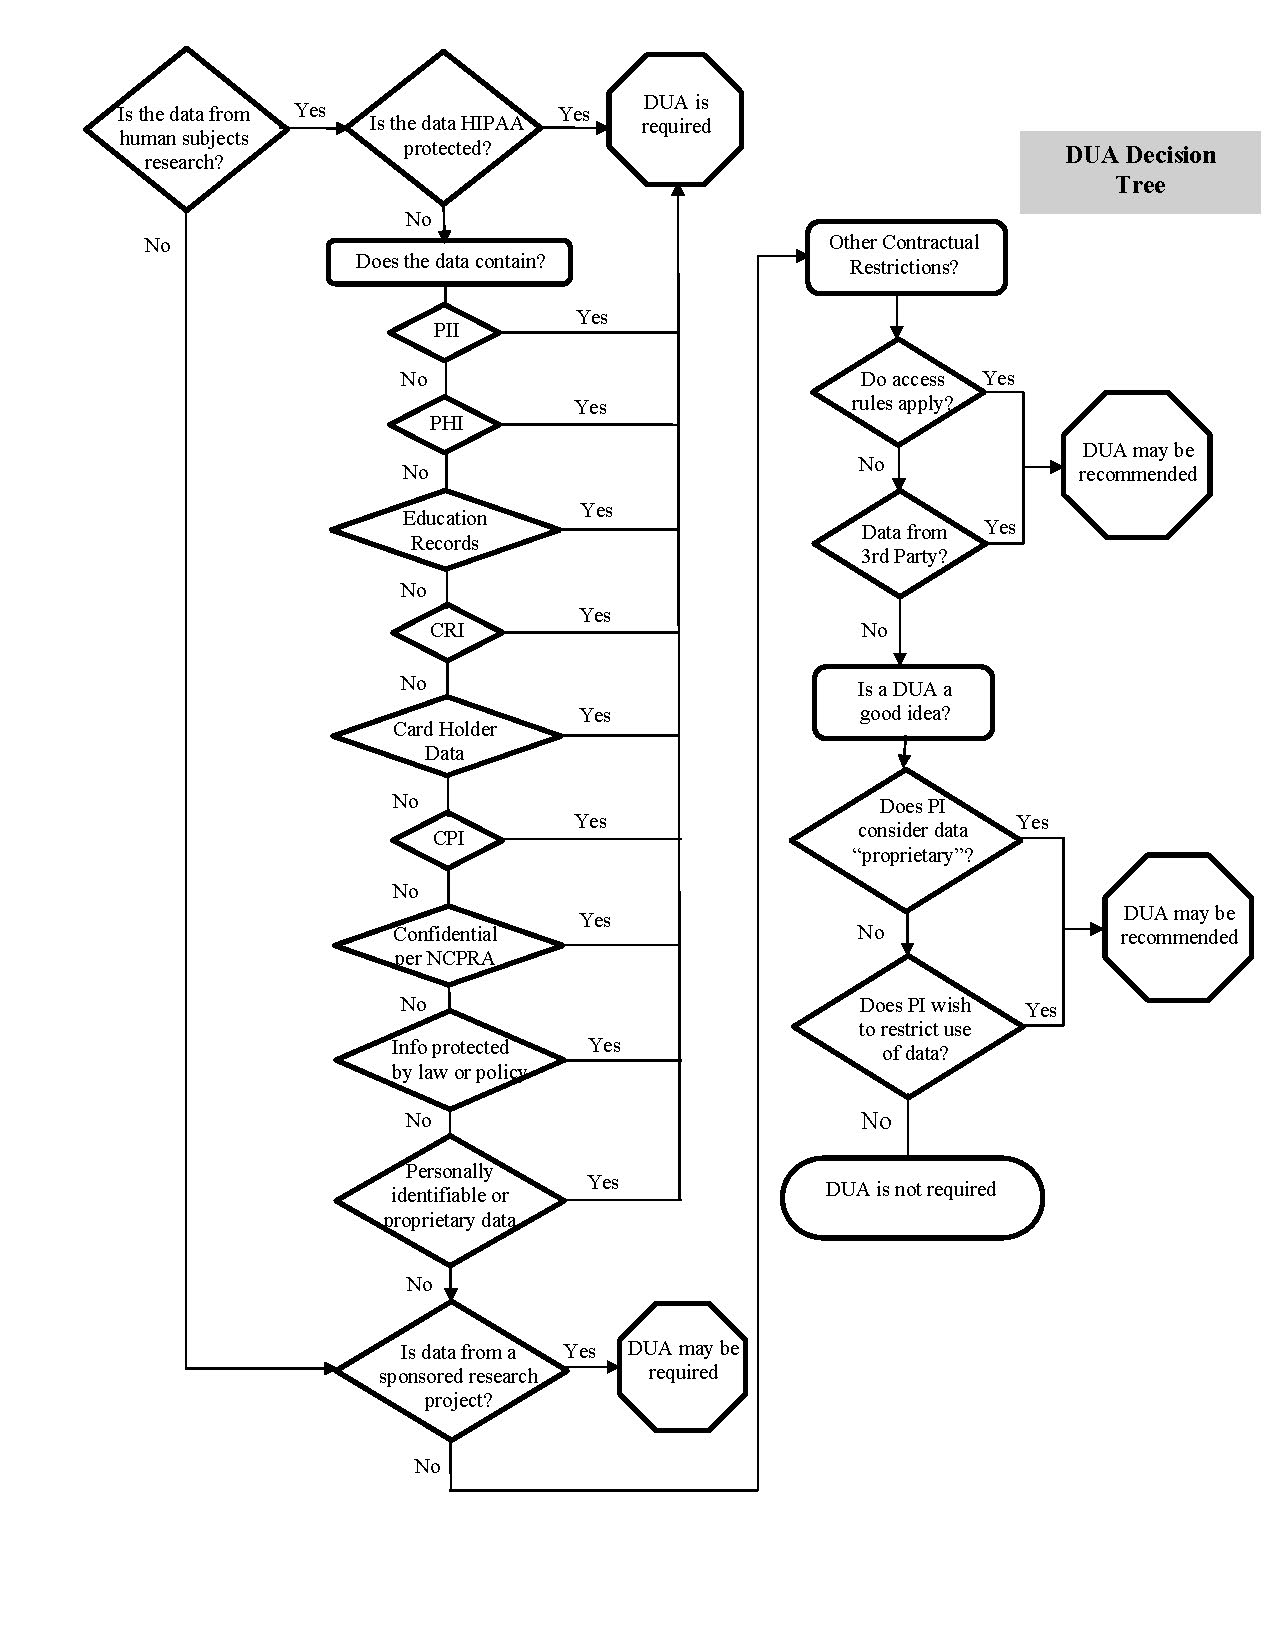 DUA Decision Tree. Go to the image long description page for an explanation of the flowchart.